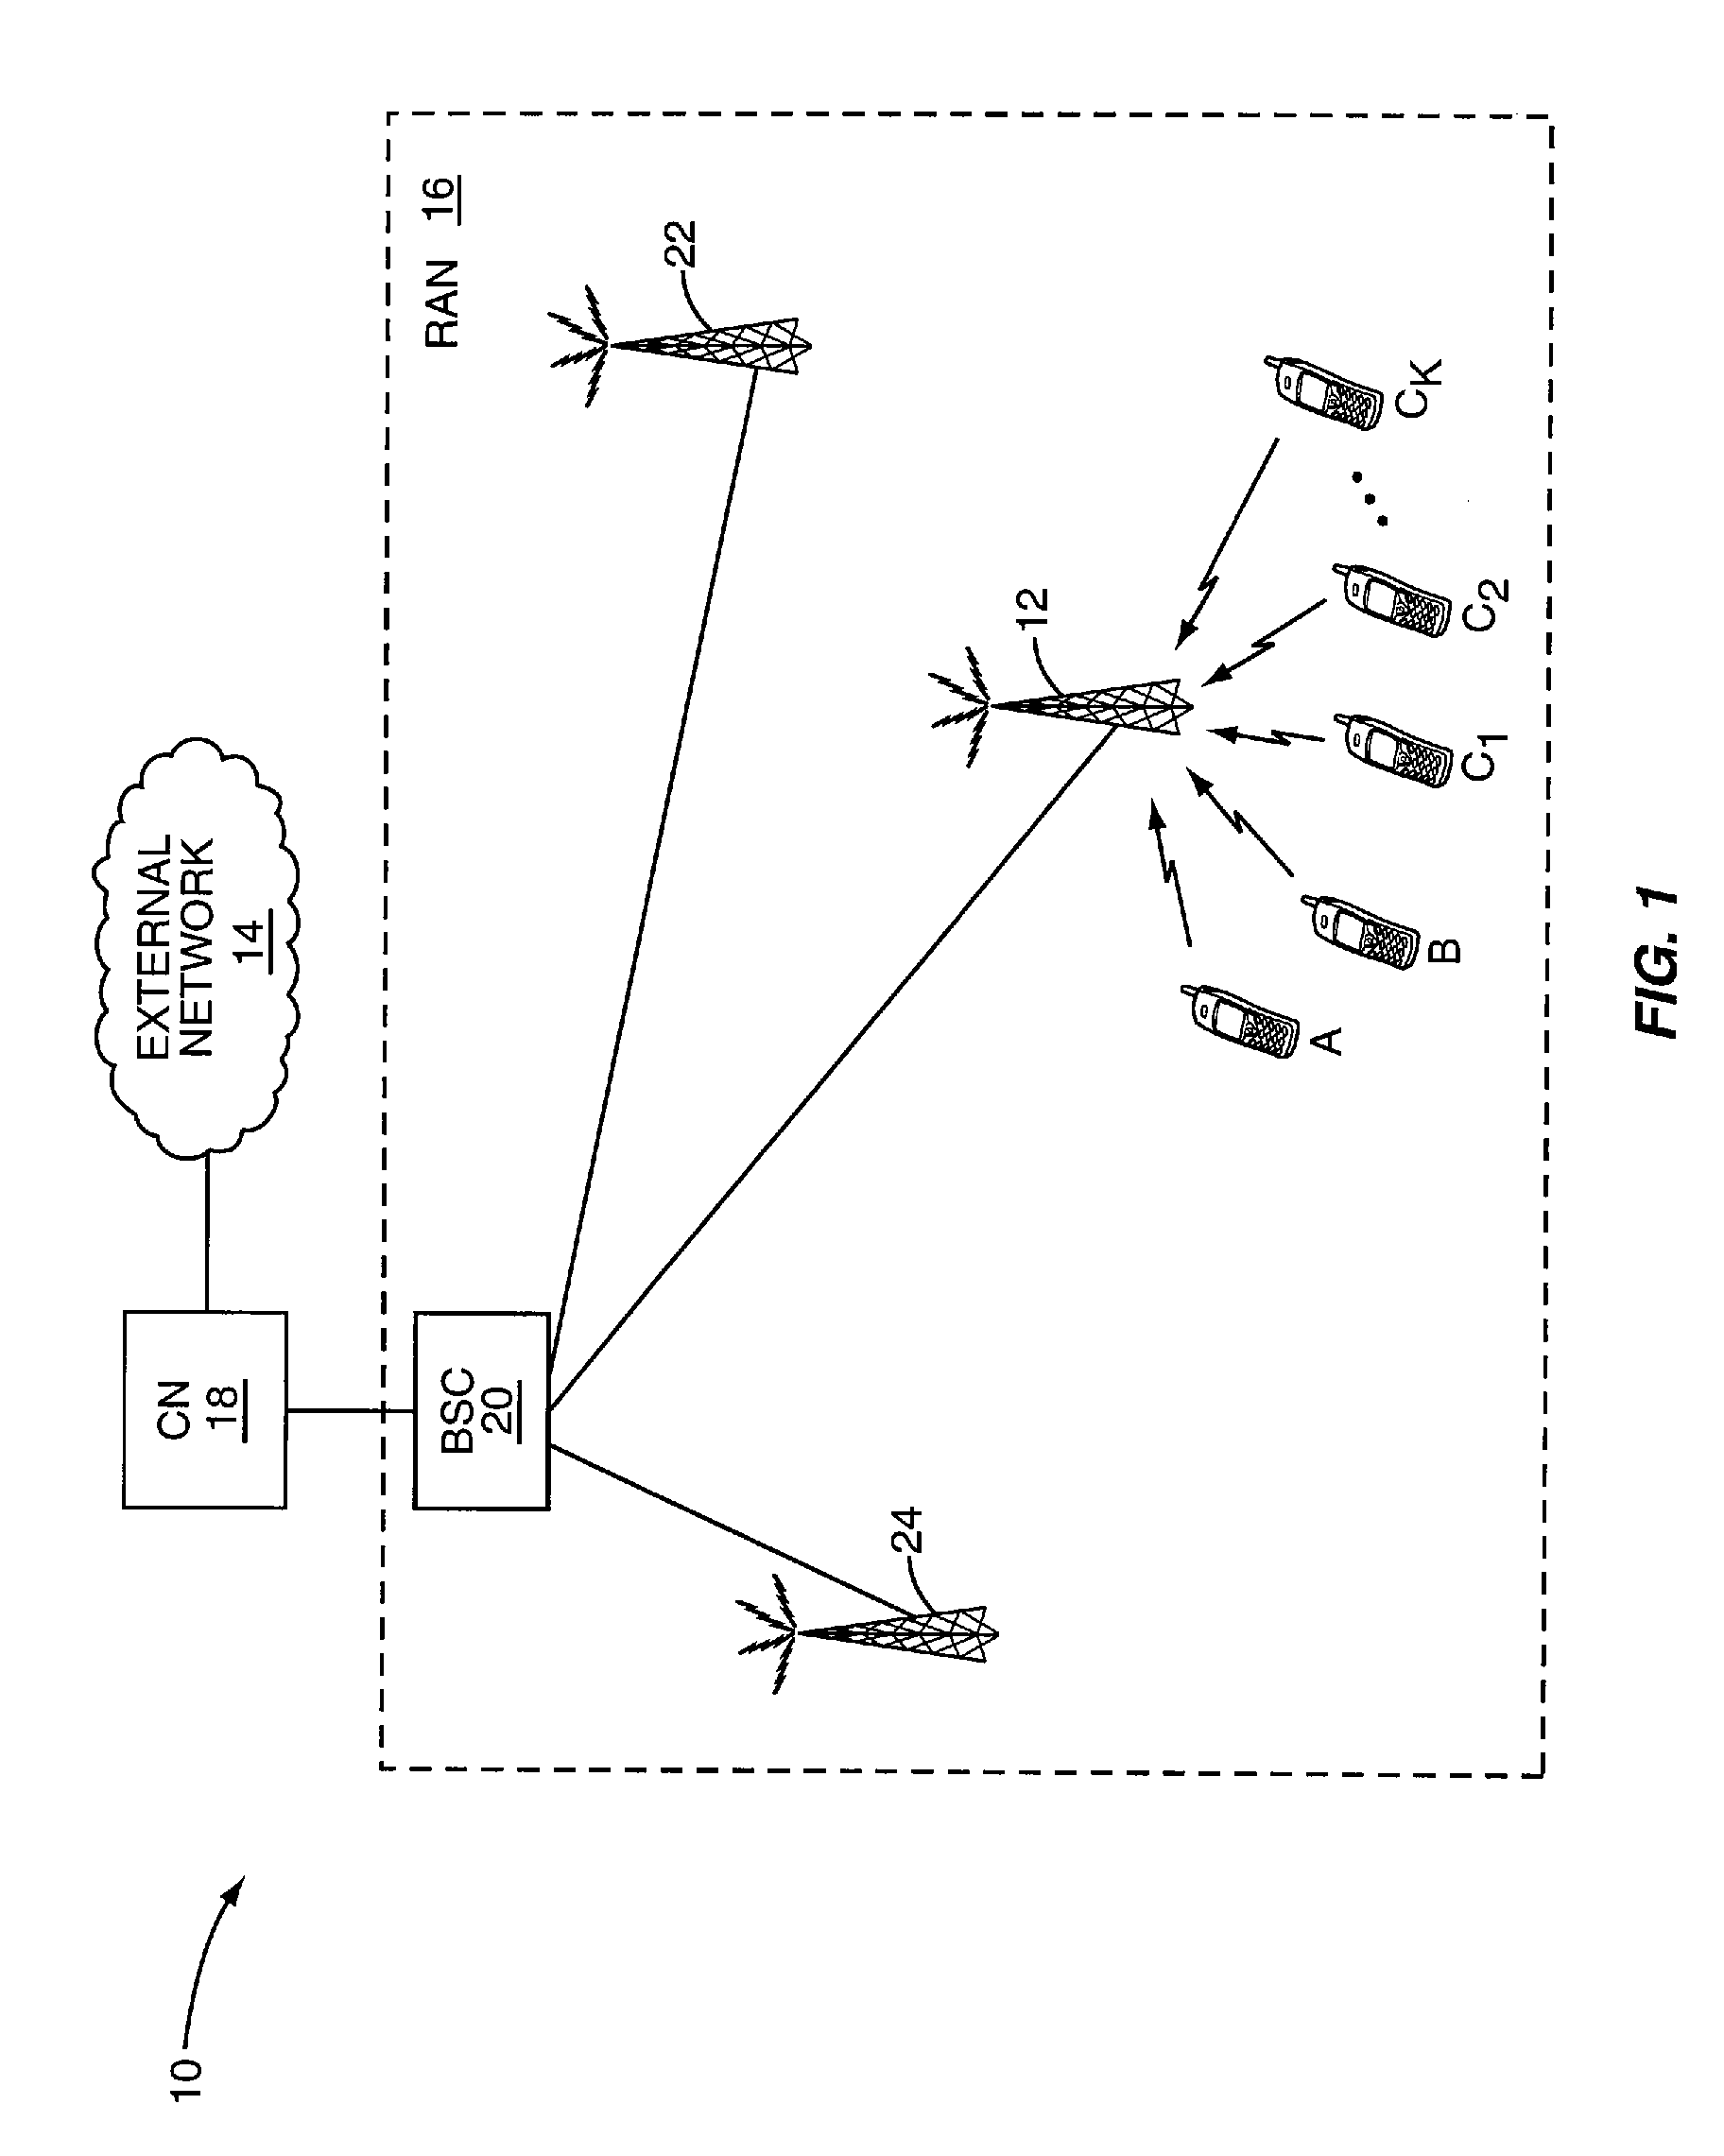 Method and Apparatus for Shared Parameter Estimation in a Generalized Rake Receiver